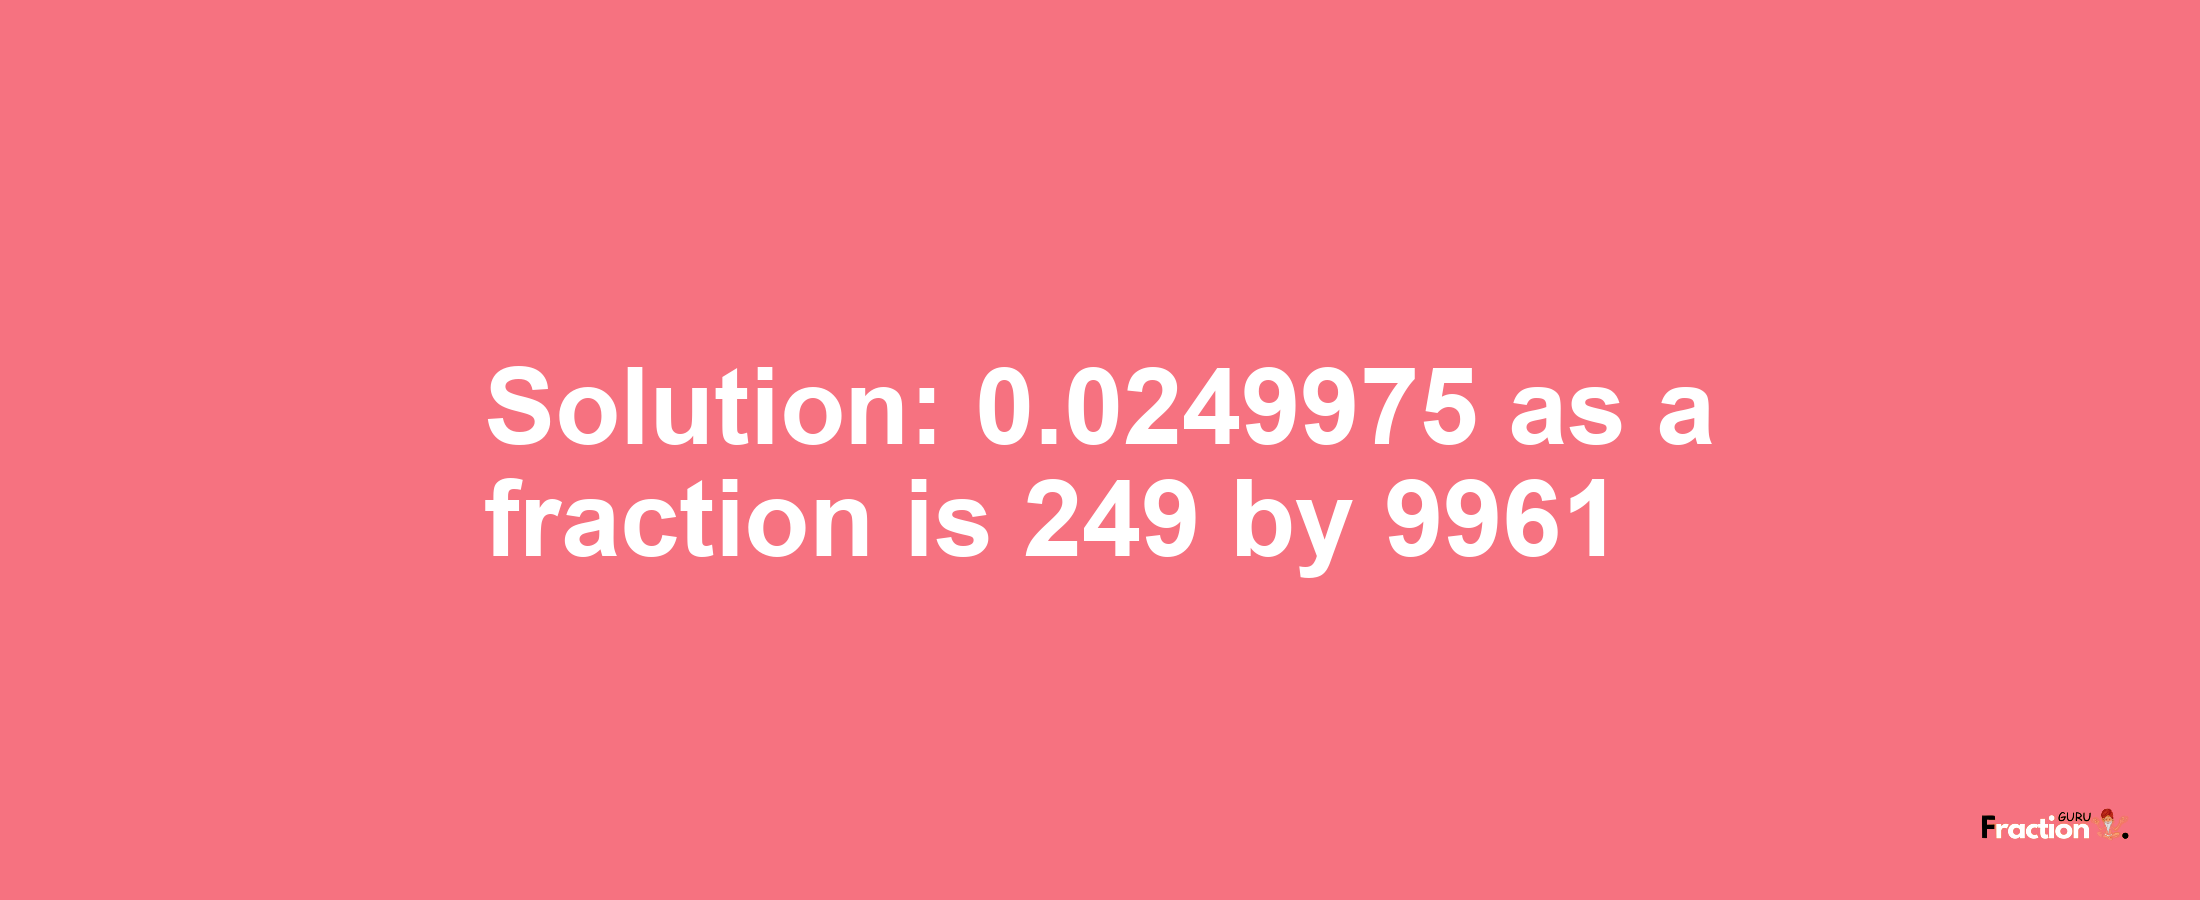 Solution:0.0249975 as a fraction is 249/9961